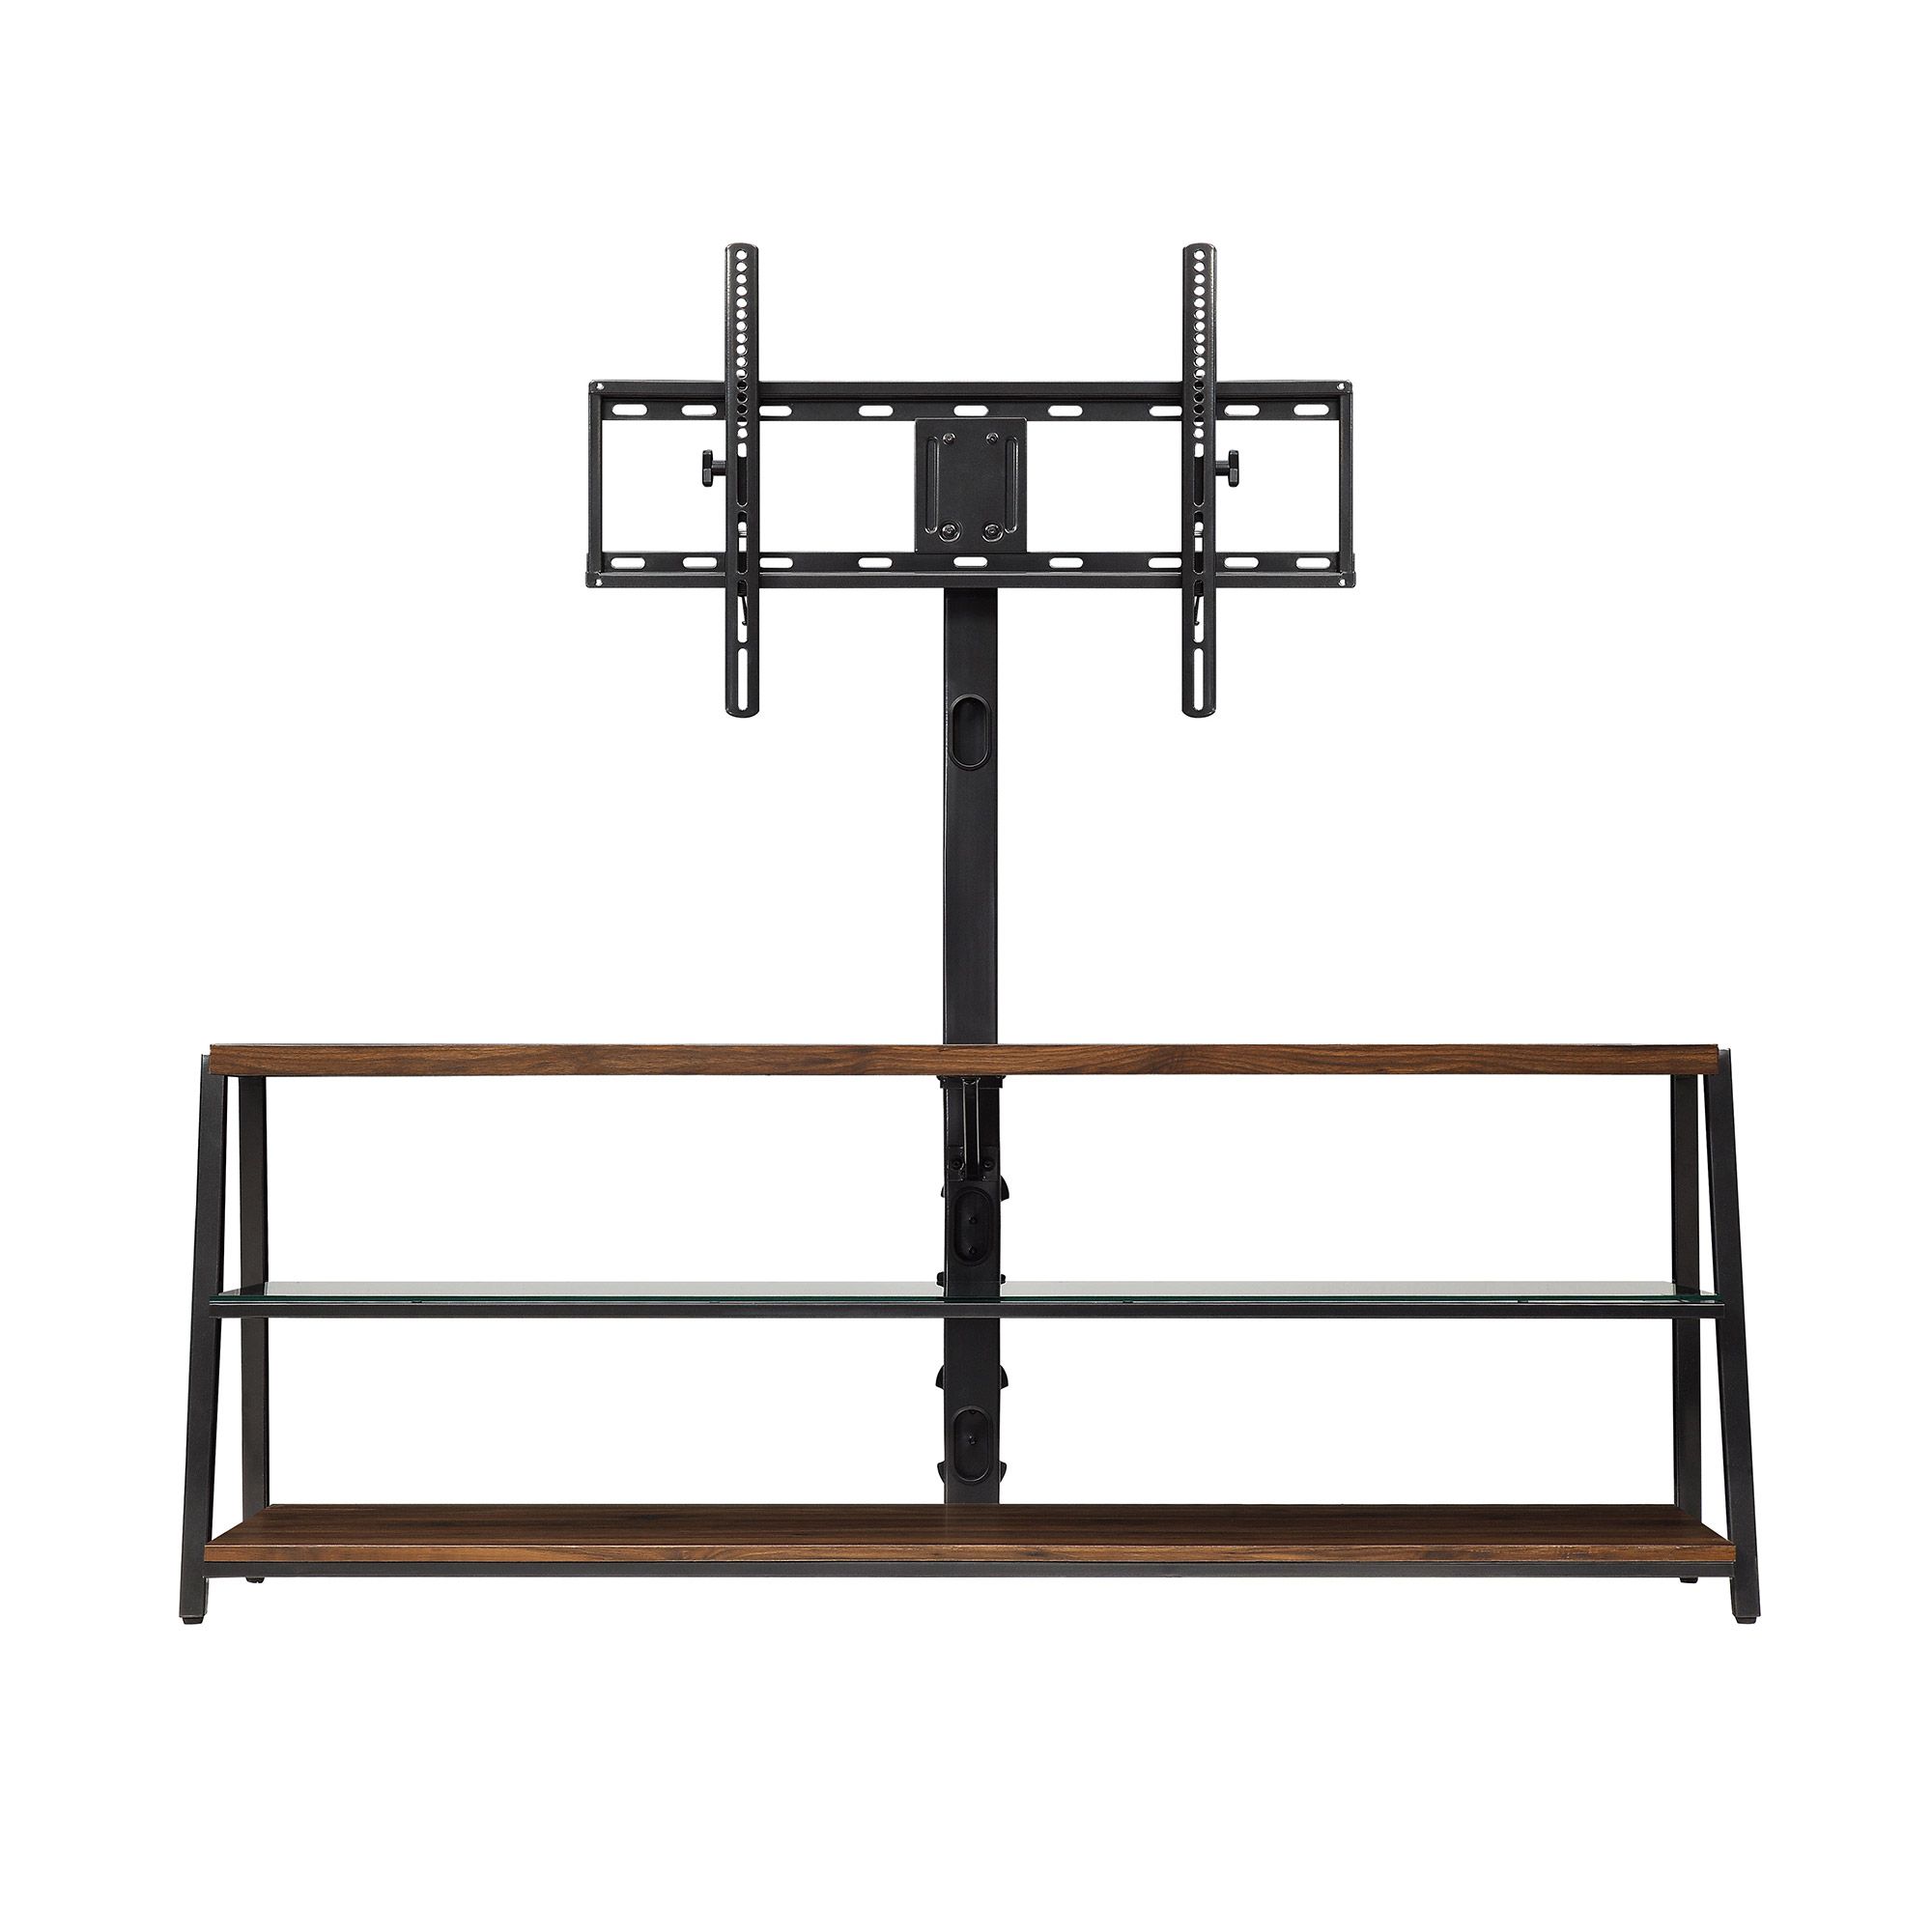 Mainstays Arris 3 In 1 Tv Stand For Televisions Up To 70 Throughout Mainstays Arris 3 In 1 Tv Stands In Canyon Walnut Finish (View 6 of 15)